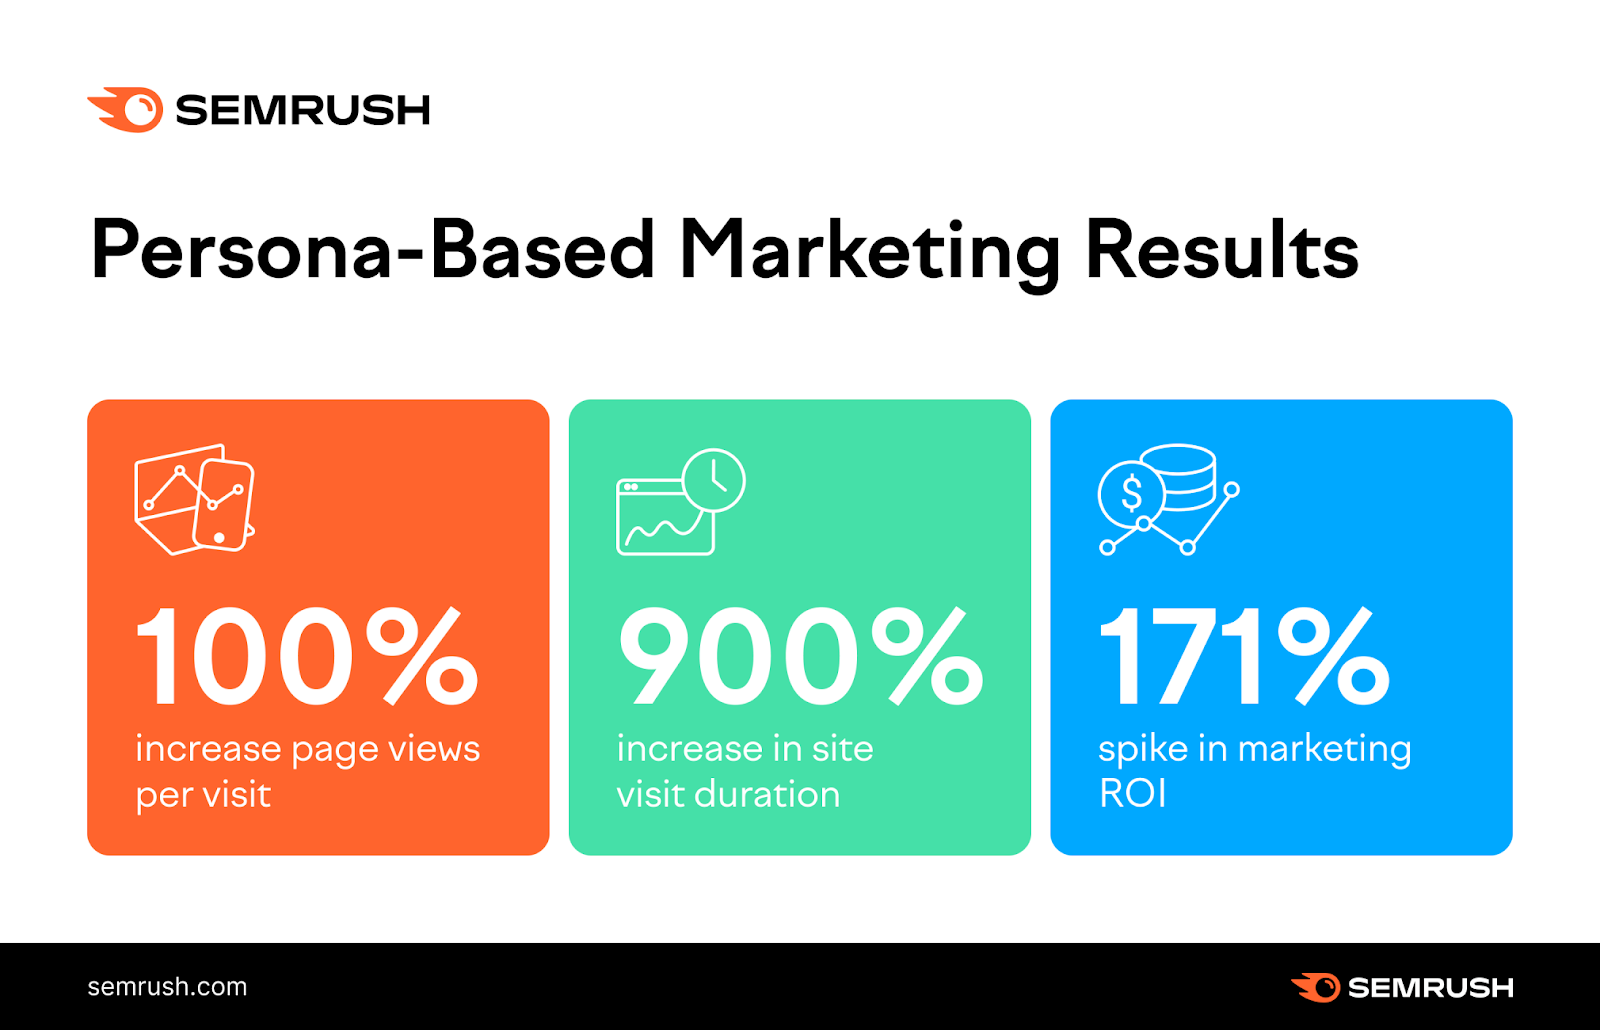 NetProspex case study results for persona-based marketing results